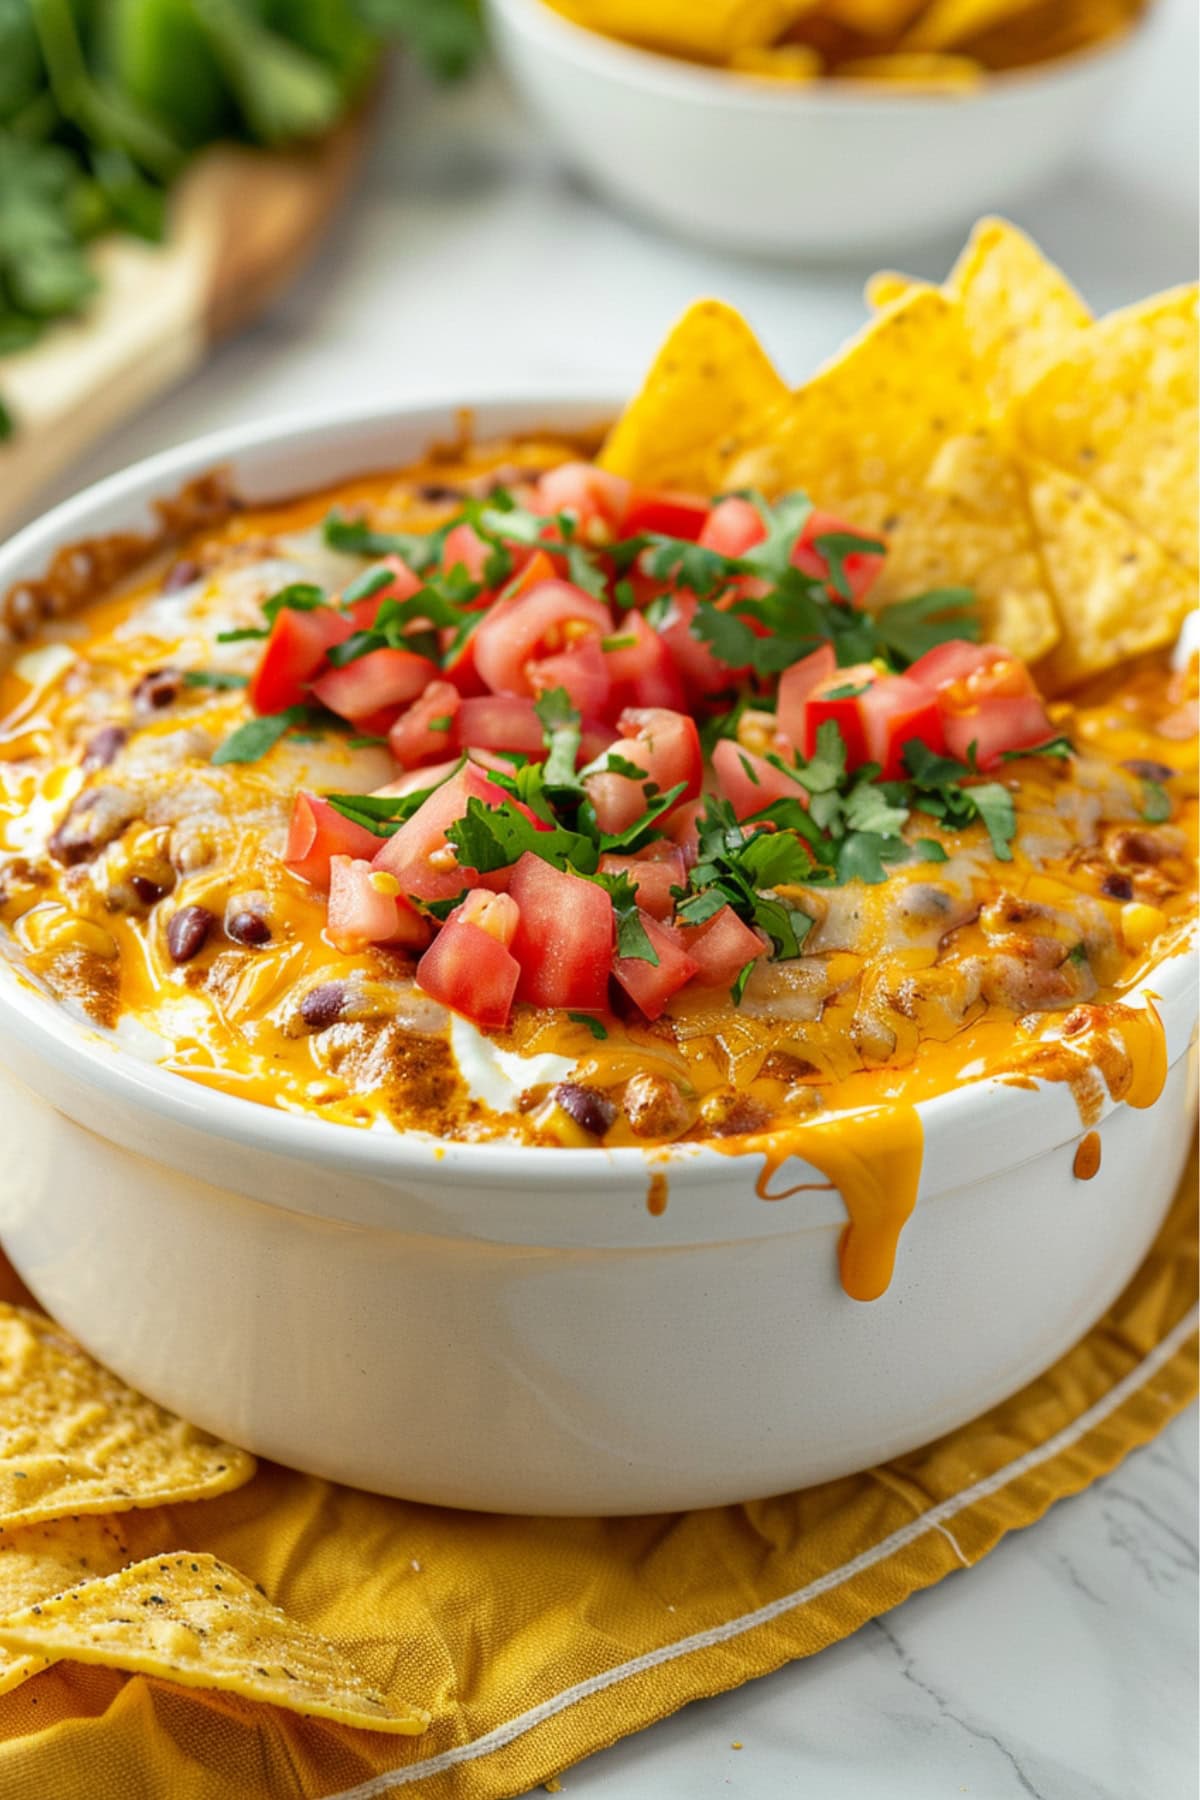 Bowl of cheesy chili dip with tortillos garnished with tomatoes and chopped cilantro leaves.